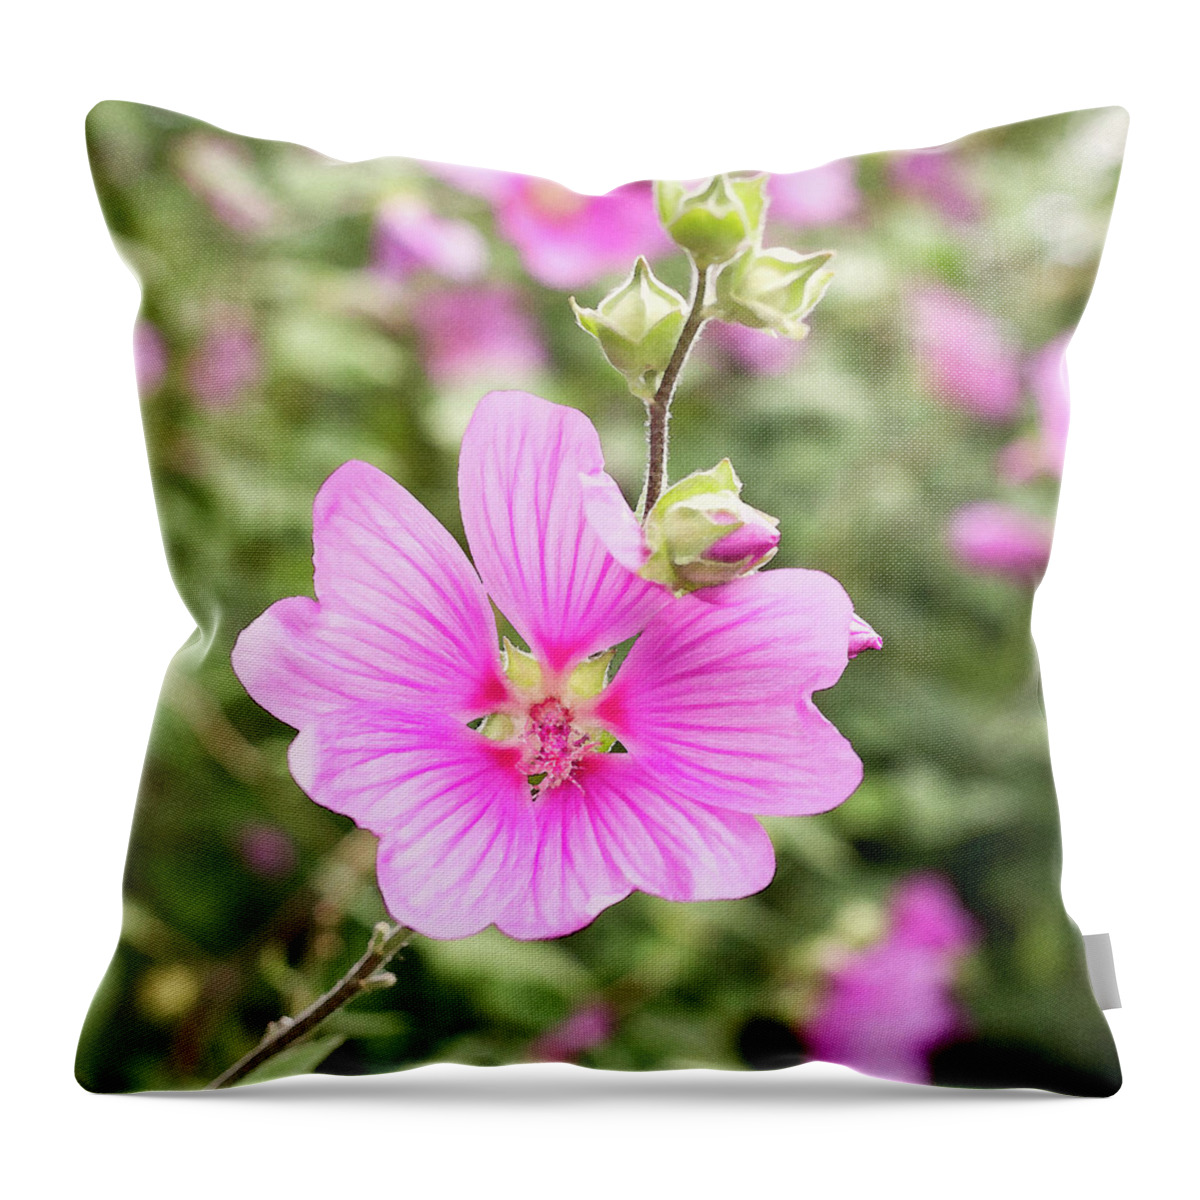 Pink Flower Throw Pillow featuring the photograph Lavatera Clementii Rosea by Tanya C Smith